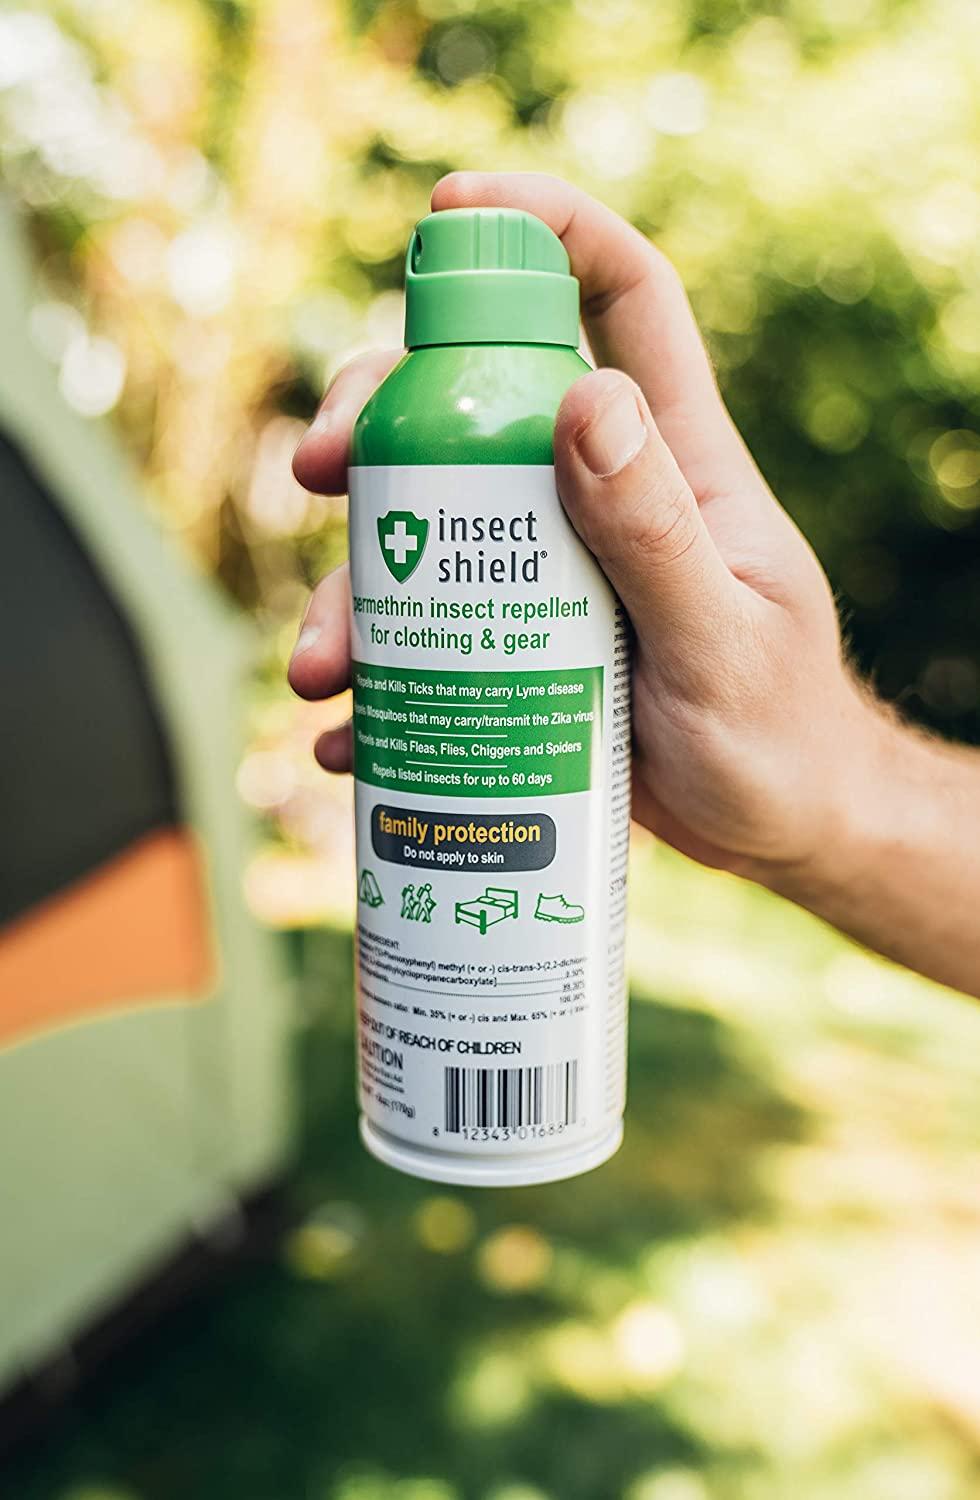 Insect Shield Premium Permethrin Spray Insect Repellent for Ticks